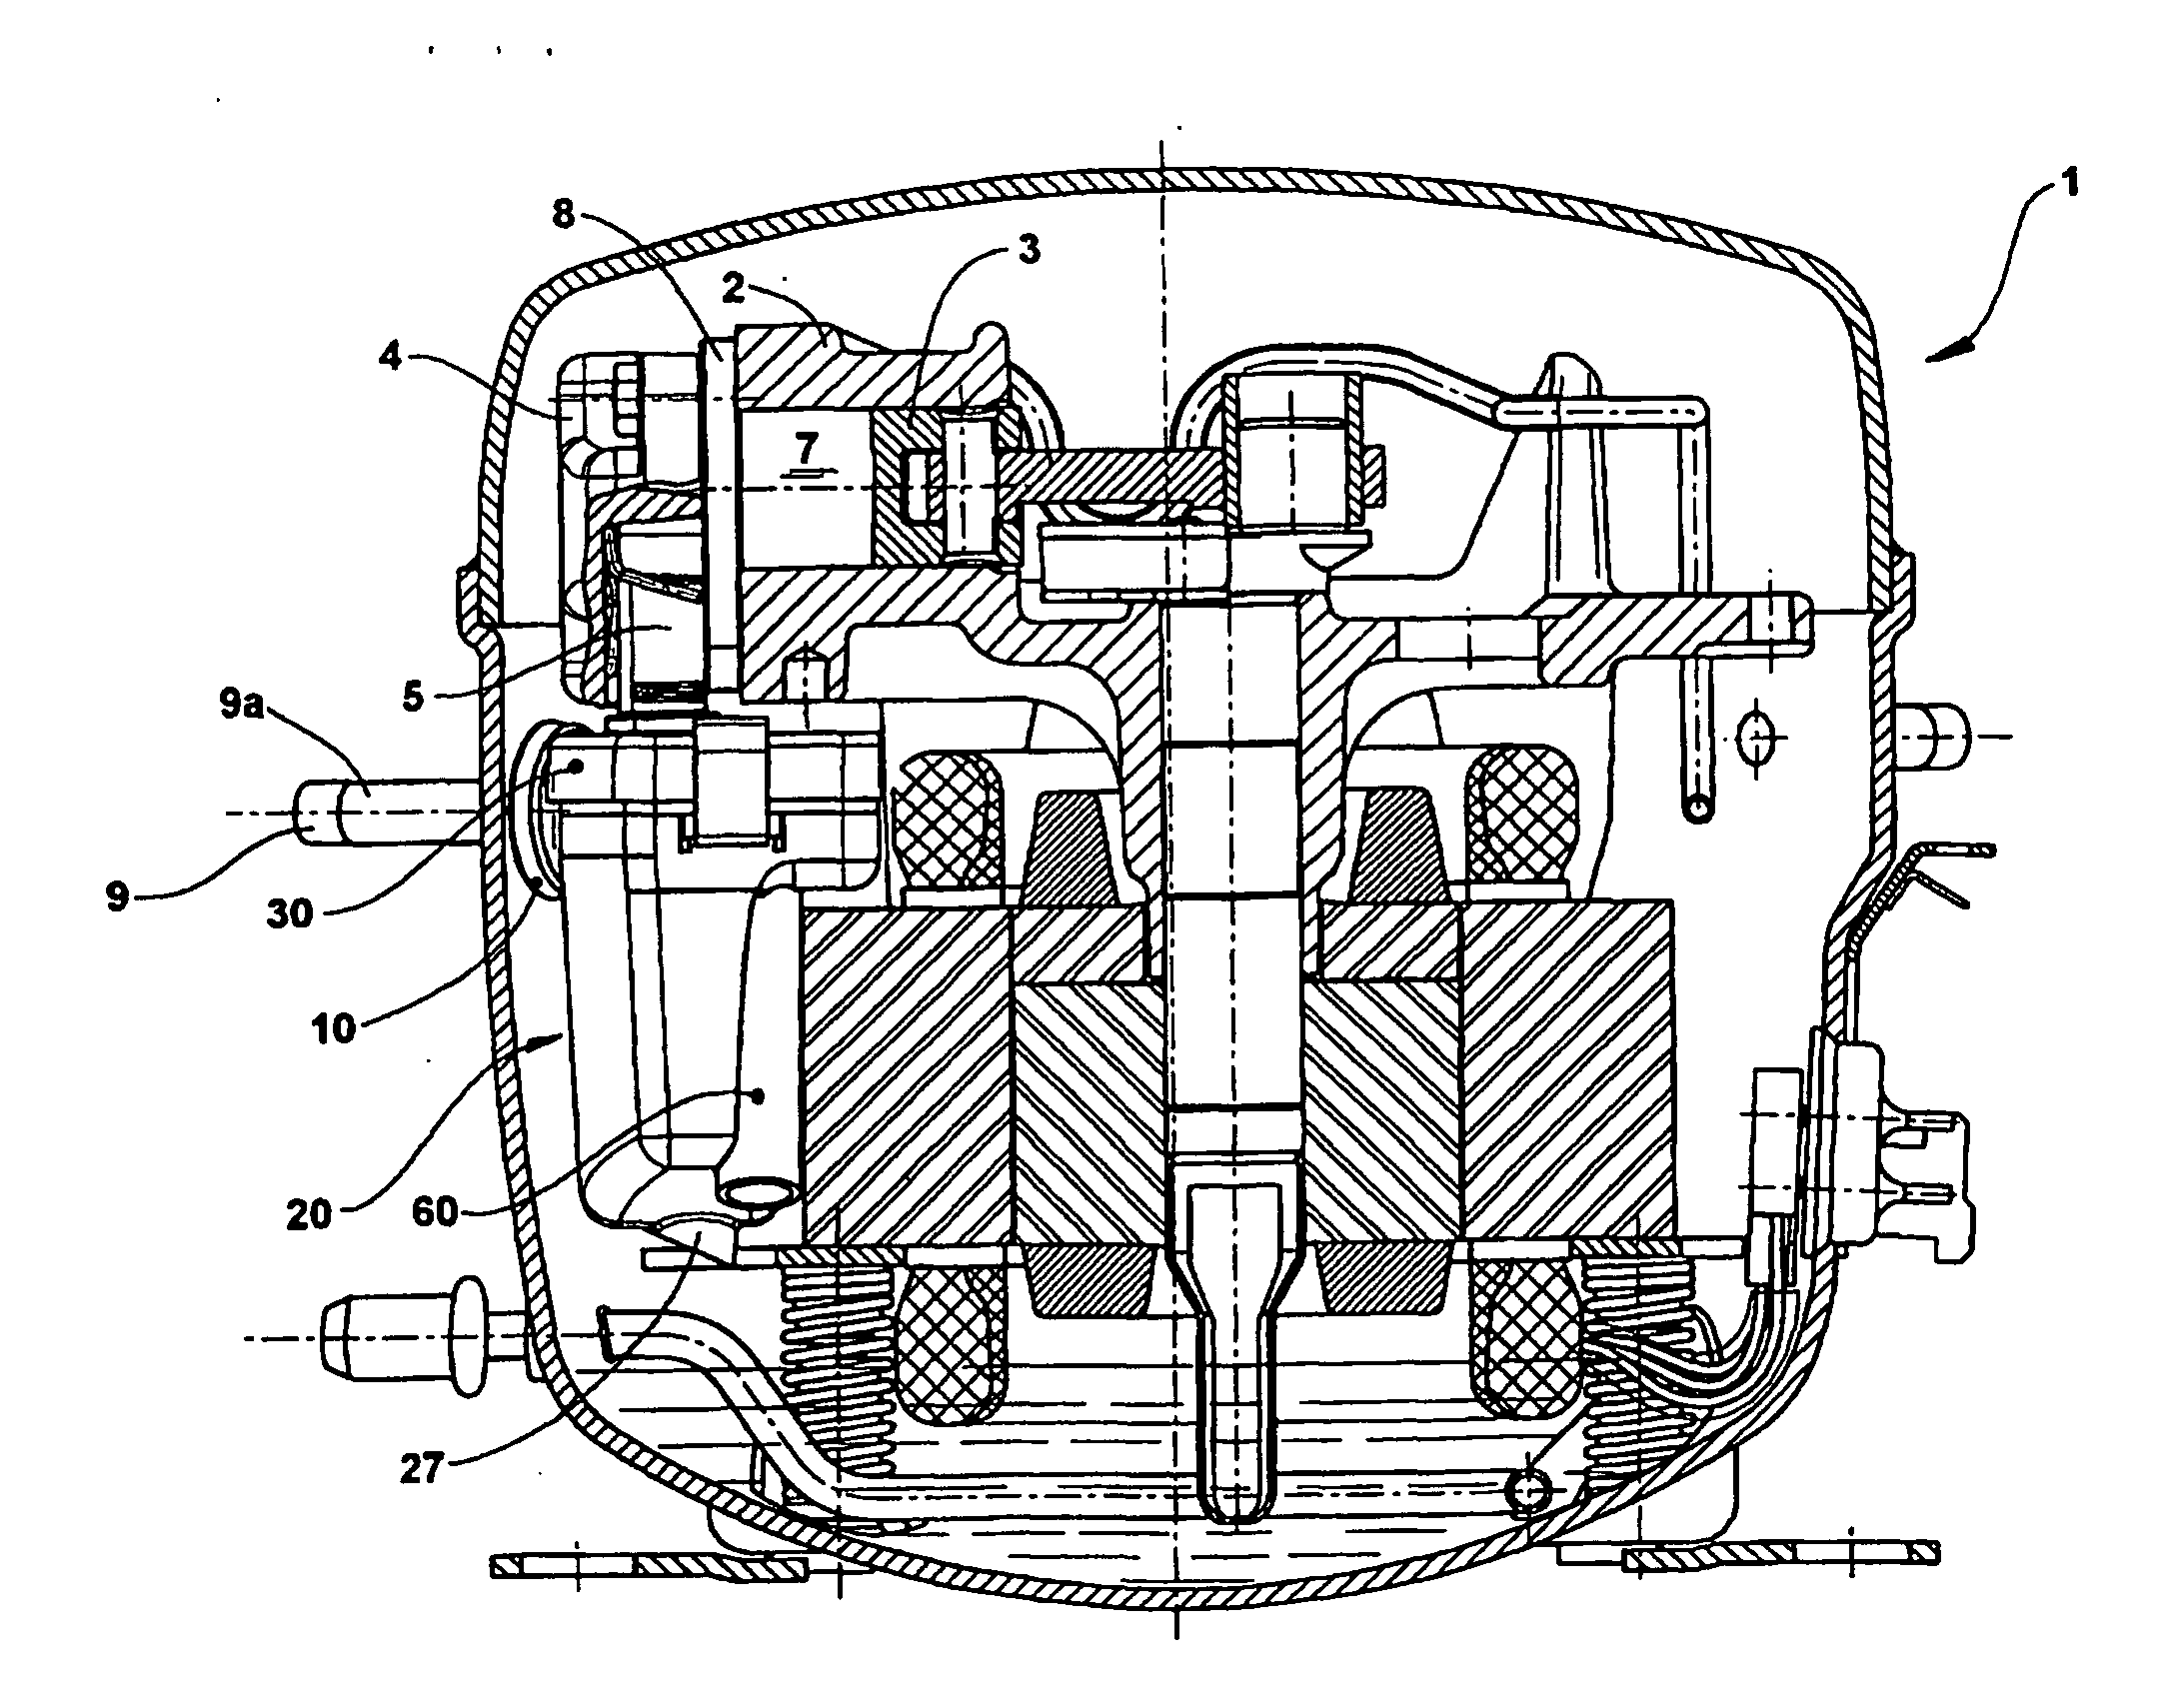 Suction muffler for a reciprocating hermetic compressor